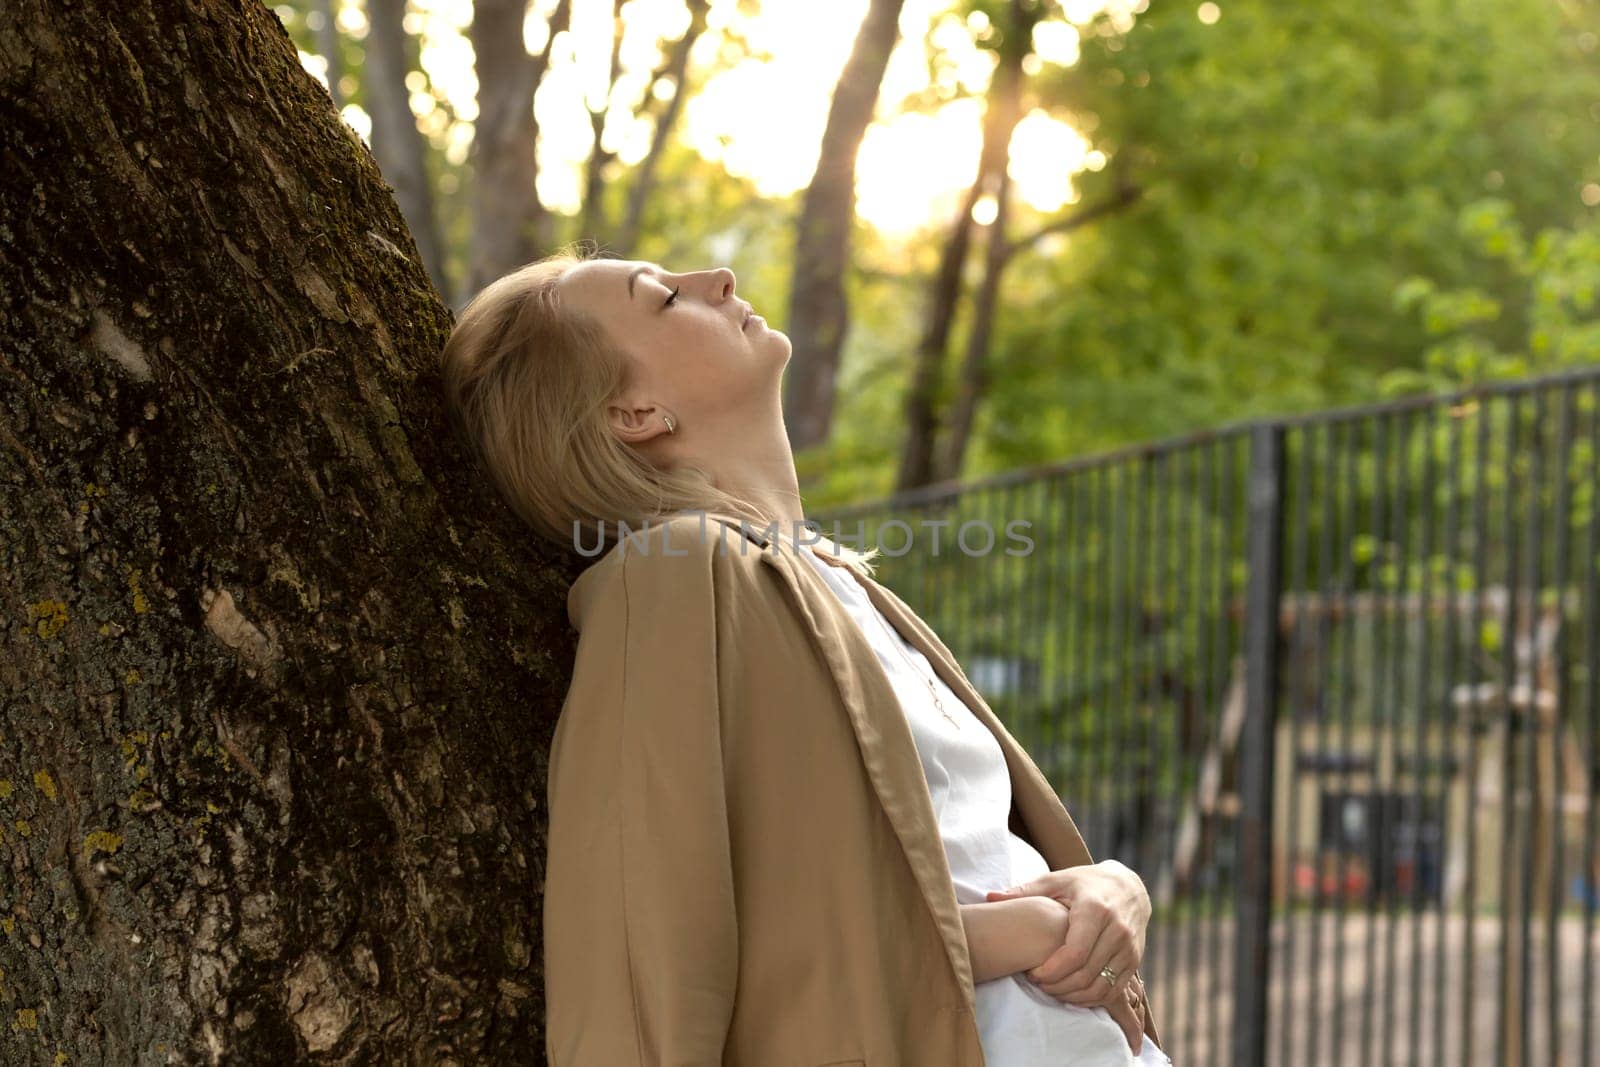 Tired White Woman Leans To Tree, Closed Her Eyes In Summer Time on Sunset. Rest And Recharge in Nature, Self Awareness, Leisure Time, Mental Health. Copy Space For Text Horizontal Plane.